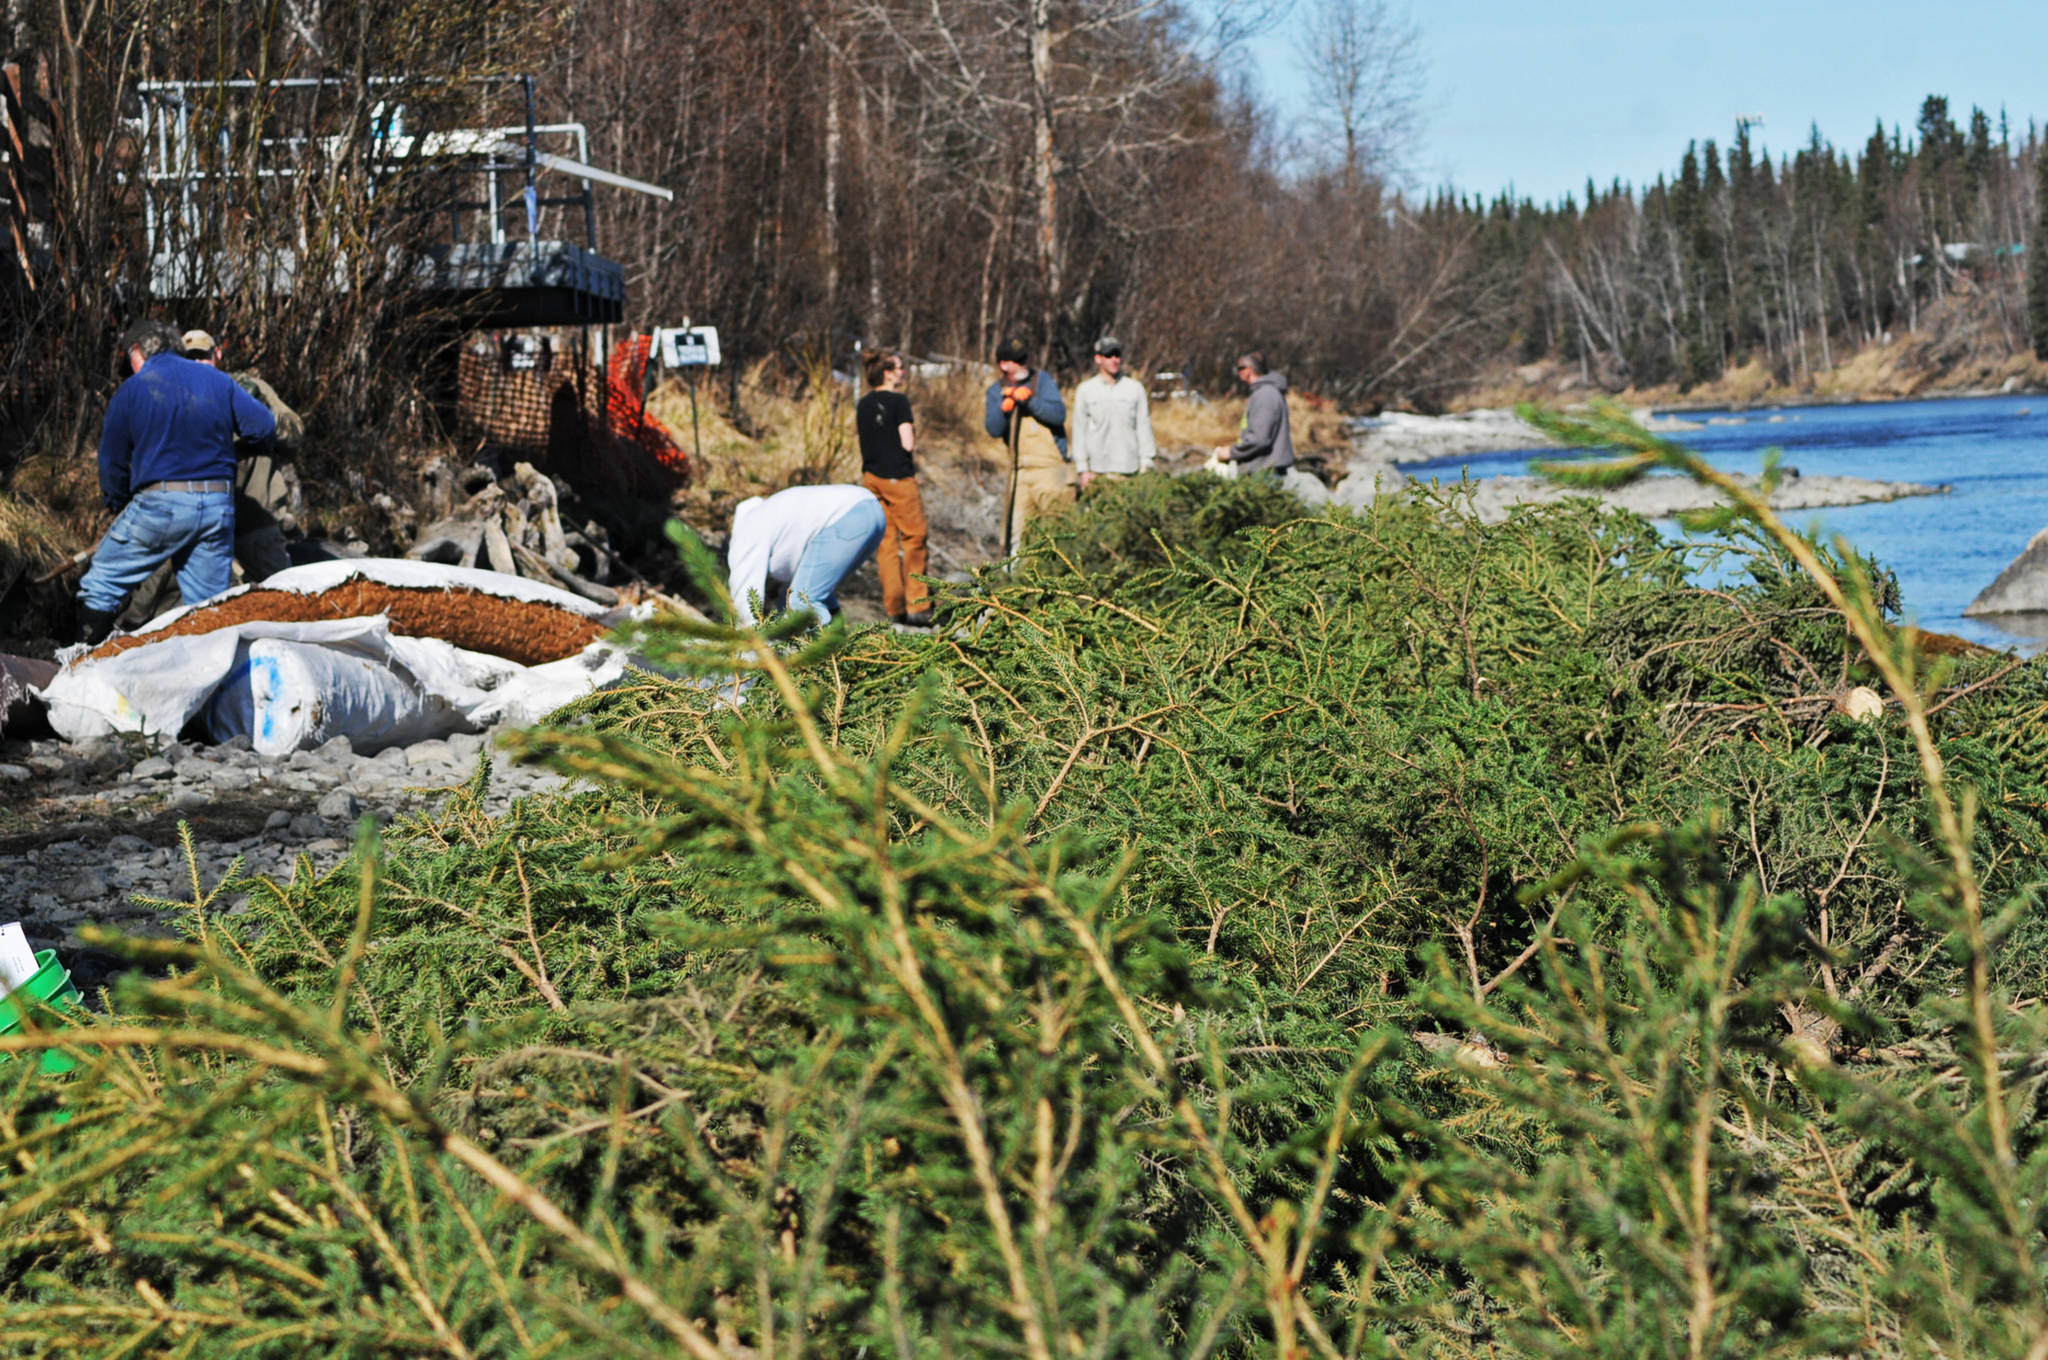 Participants in a streambank rehabilitation workshop at the Donald E. Giman River Center work to repair a damaged section of the Kenai River’s bank Wednesday, May 10, 2017 in Soldotna, Alaska. The free two-day annual workshop, hosted by the Alaska Department of Fish and Game, teaches people how to properly repair damaged fish habitat along streams in Alaska. (Elizabeth Earl/Peninsula Clarion)  Participants in a streambank rehabilitation workshop at the Donald E. Giman River Center work to repair a damaged section of the Kenai River’s bank Wednesday in Soldotna. The free two-day annual workshop, hosted by the Alaska Department of Fish and Game, teaches people how to properly repair damaged fish habitat along streams in Alaska. (Elizabeth Earl/Peninsula Clarion)